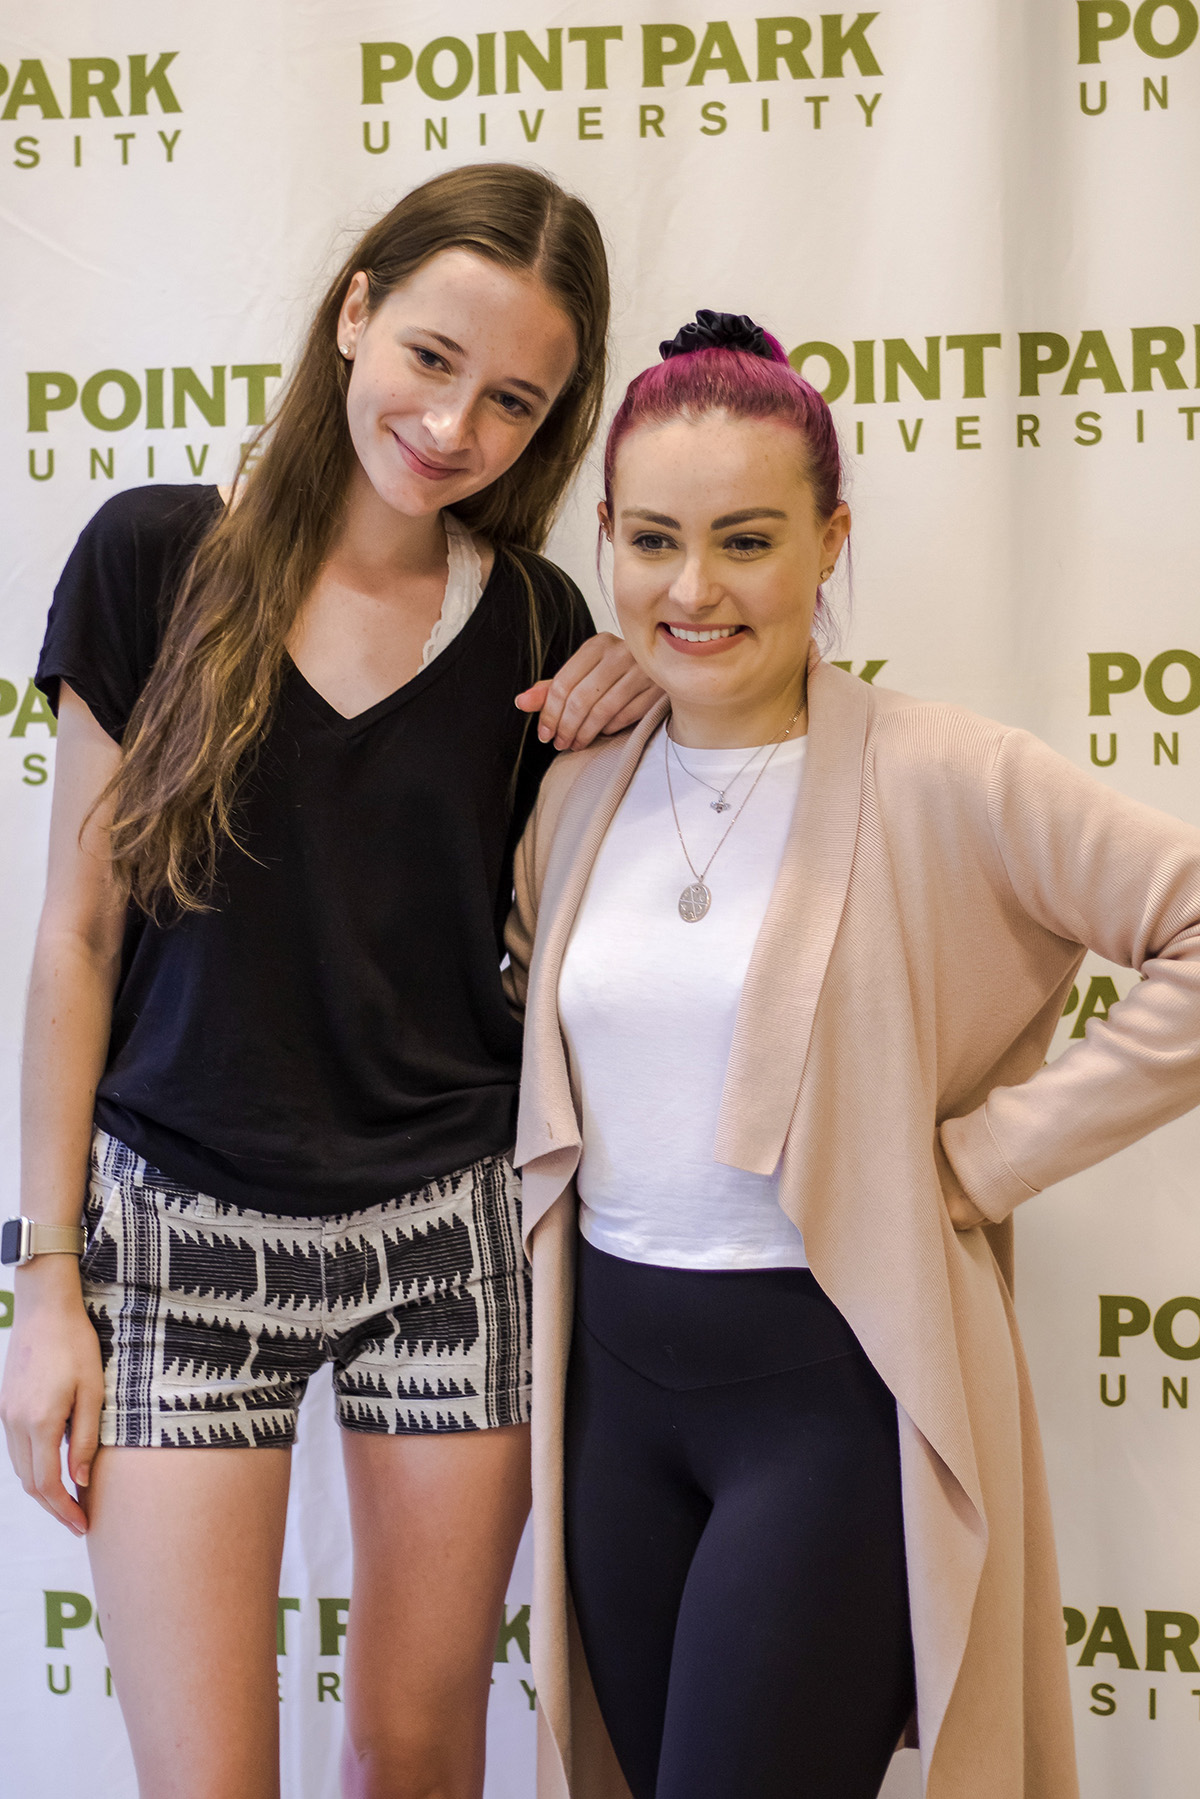 Pictured is YouTube sensation Molly Burke at Point Park University. Photo by Anna Wolf